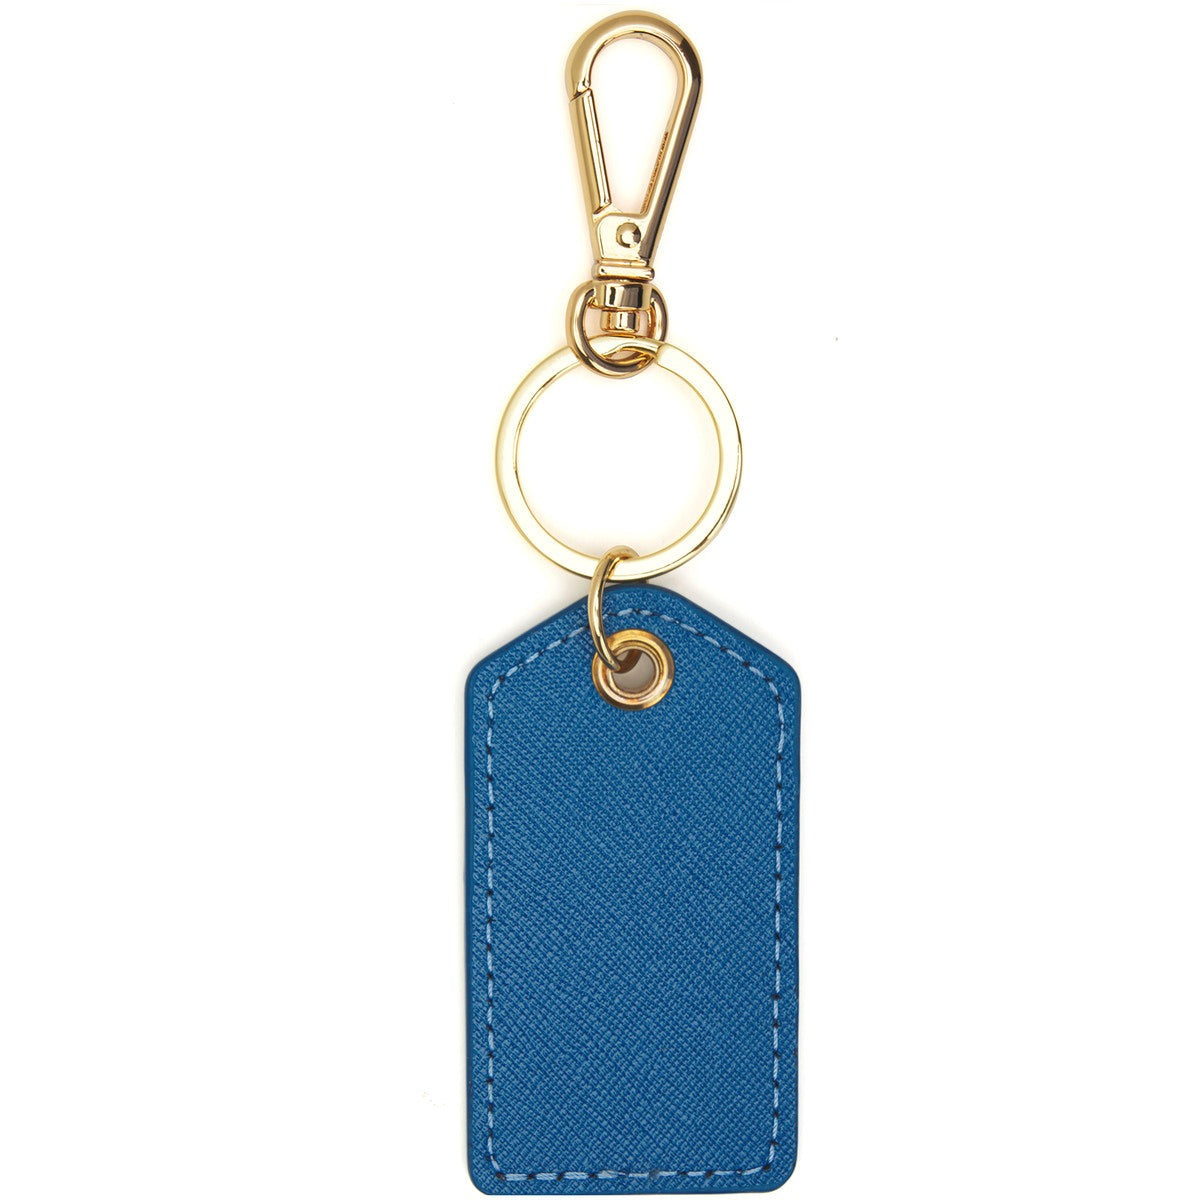 Leather Key Chain - Give Wink